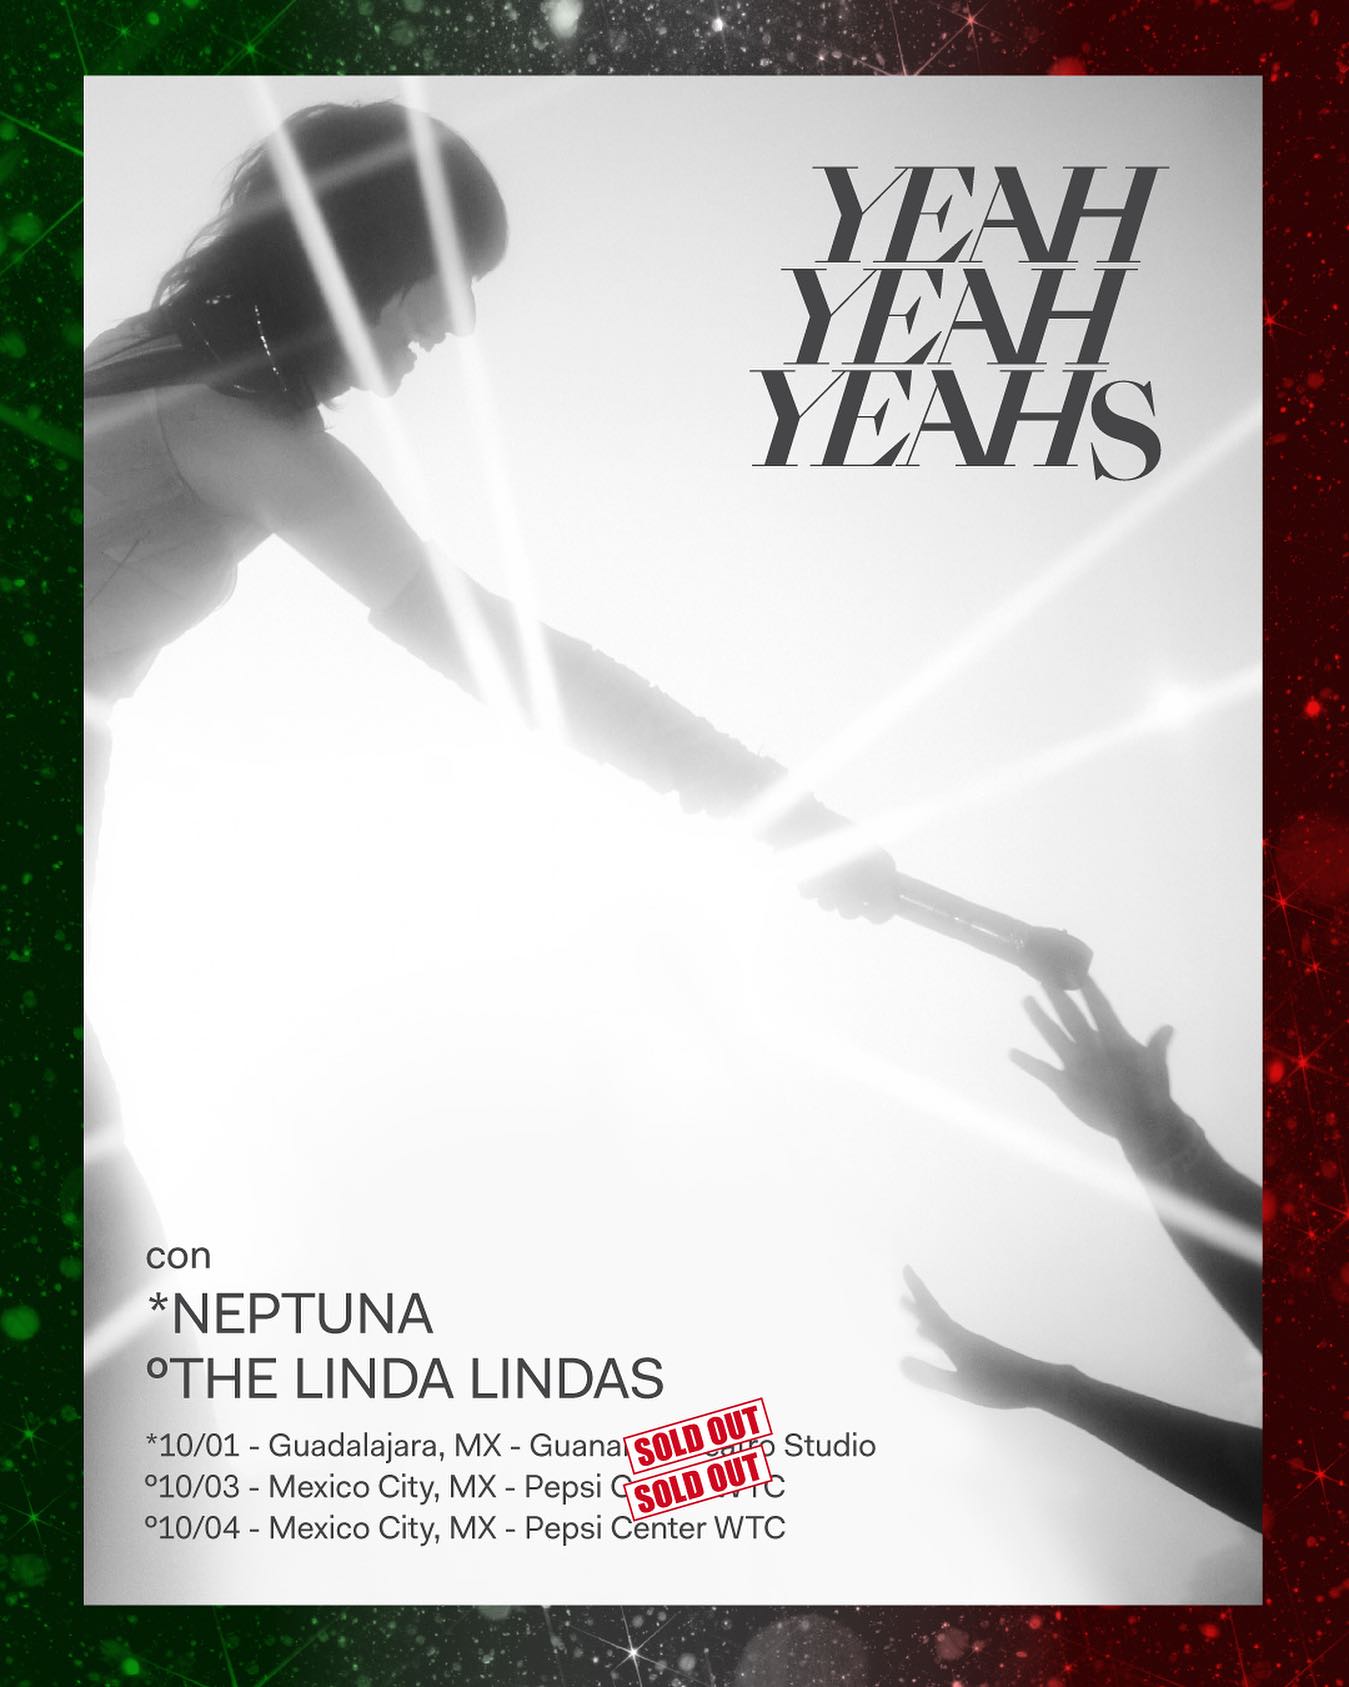 yeah yeah yeahs mexico 2023 sold out